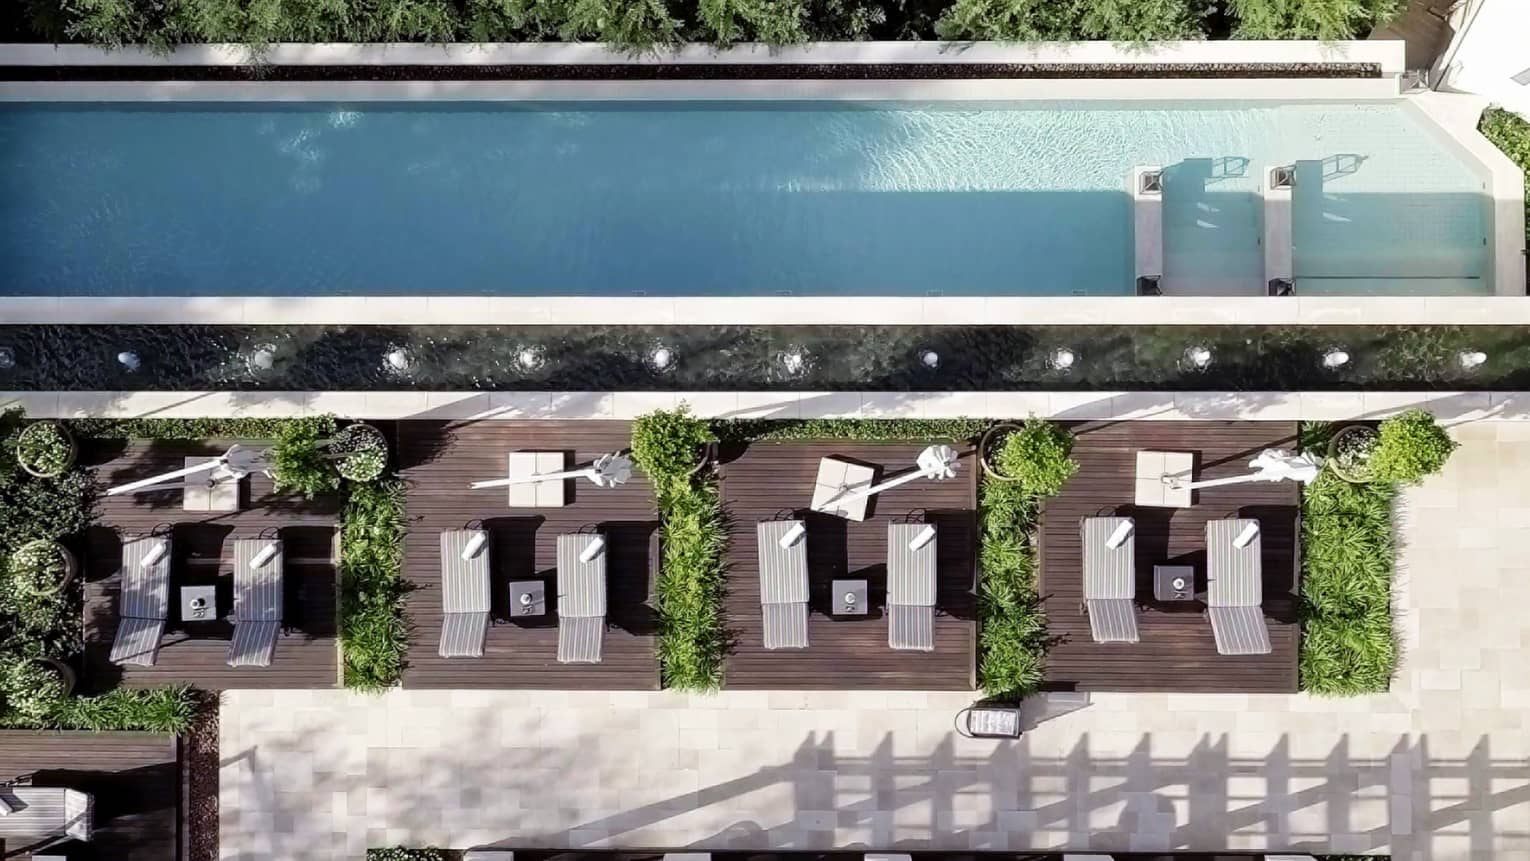 Aerial view of long rectangular outdoor swimming pool, lounge chairs on wood deck